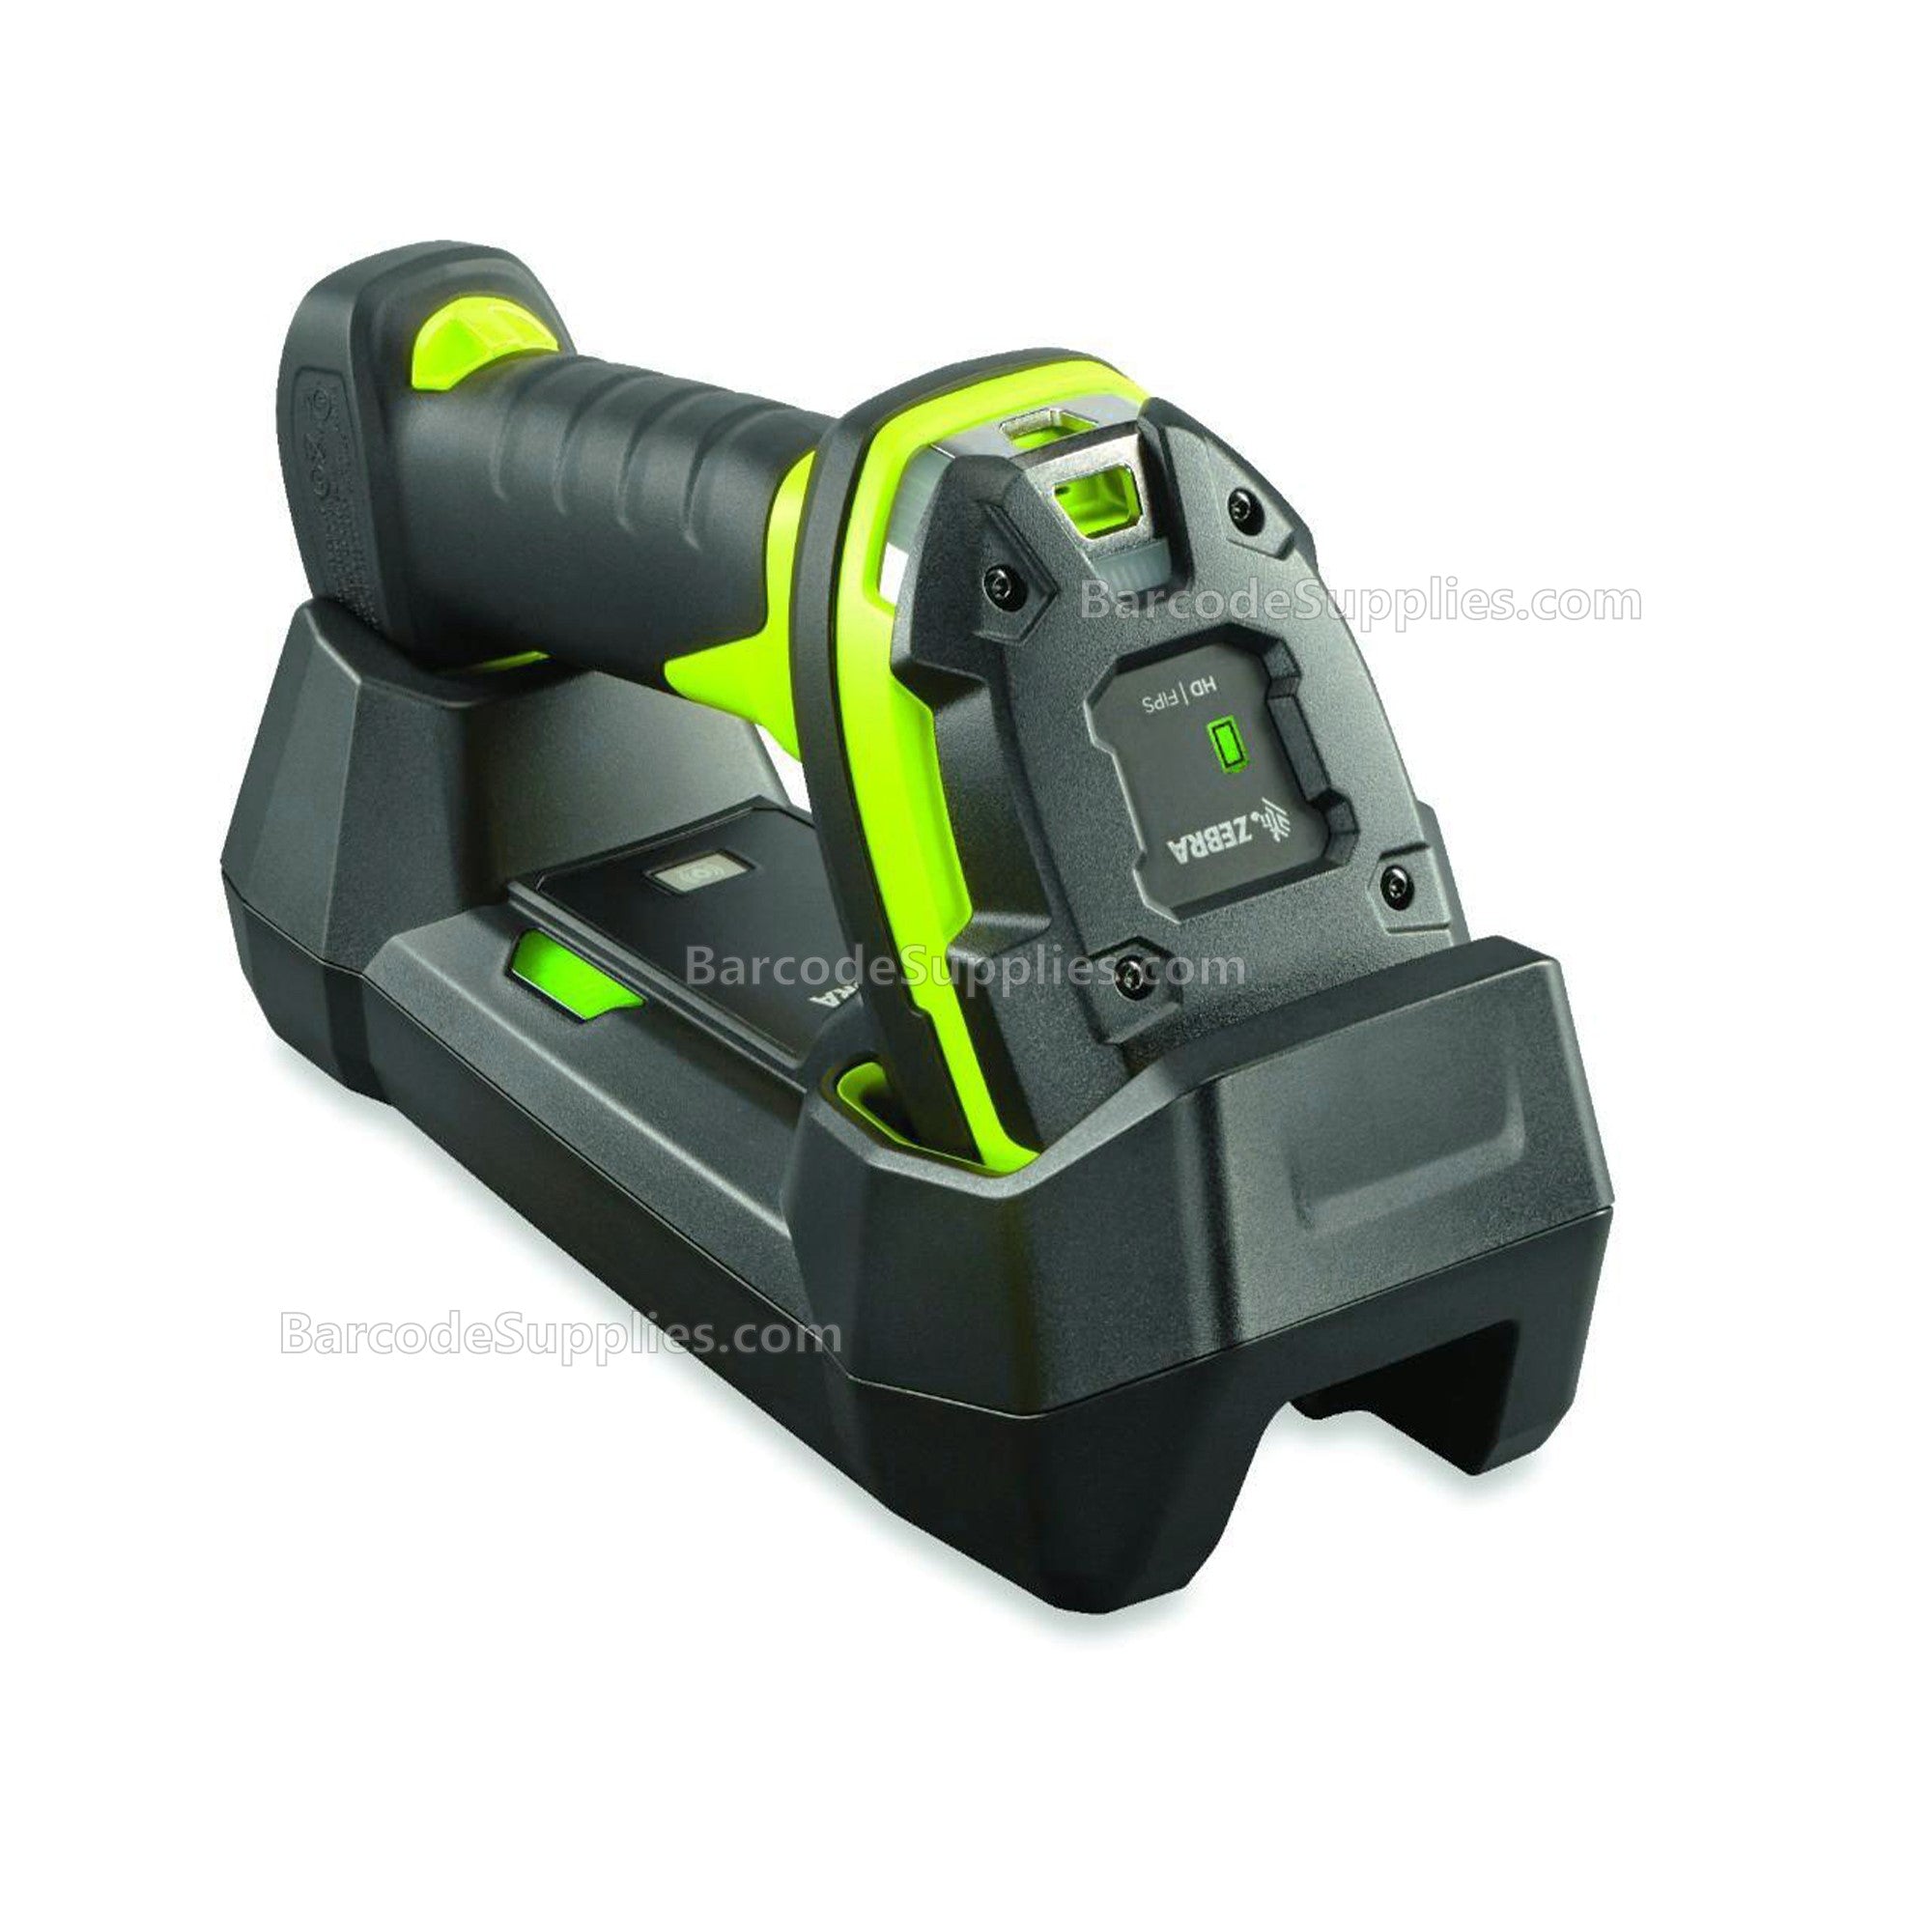 Zebra DS3678-HD Rugged Green Standard Cradle USB Kit: DS3678-HD2F003VZWW Scanner, CBA-U42-S07PAR Shielded USB Cable Supports 12V P/S, STB3678-C100F3WW Cradle, PWR-BGA12V50W0WW Power Supply, CBL-DC-451A1-01 and 23844-00-00R Line Cord